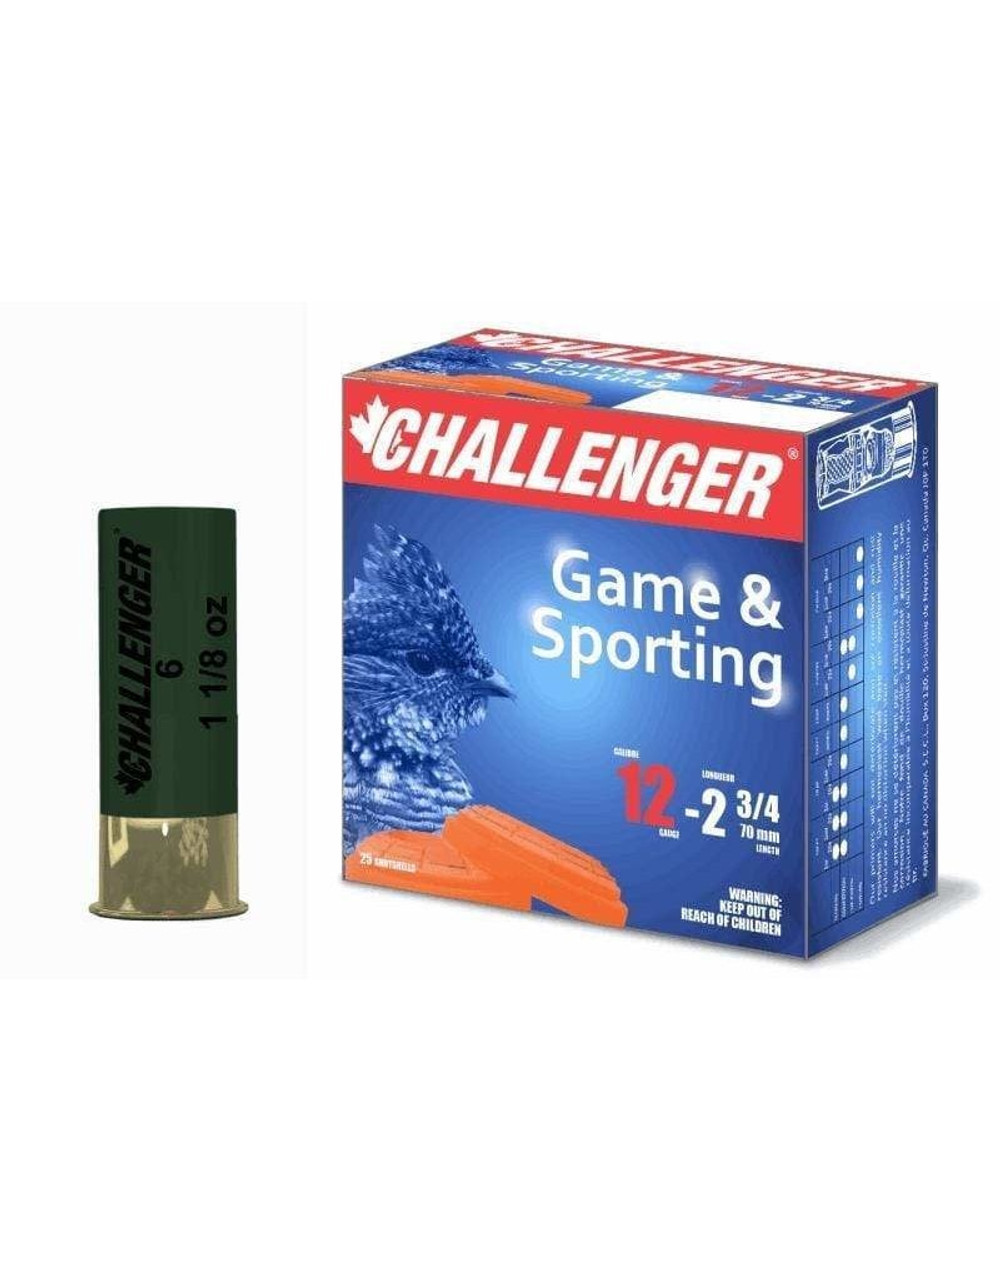 Challenger 12 GA Game & Sporting

Challenger Started out of Saint Justine de Newton in 1983 when Elie Zarifé started building shotshells. He was motivated to build shotgun ammo because clay-shooter and hunters couldn't get ammunition at the right price.

To this day Challenger has provided millions of locally made shotgun shells to Canadians across the country! They are top suppliers of 12 gauge shotgun ammo across Canada.

Specifications

Velocity: 1275 FPS
Shot: 1-1/8 oz #6
25 per box